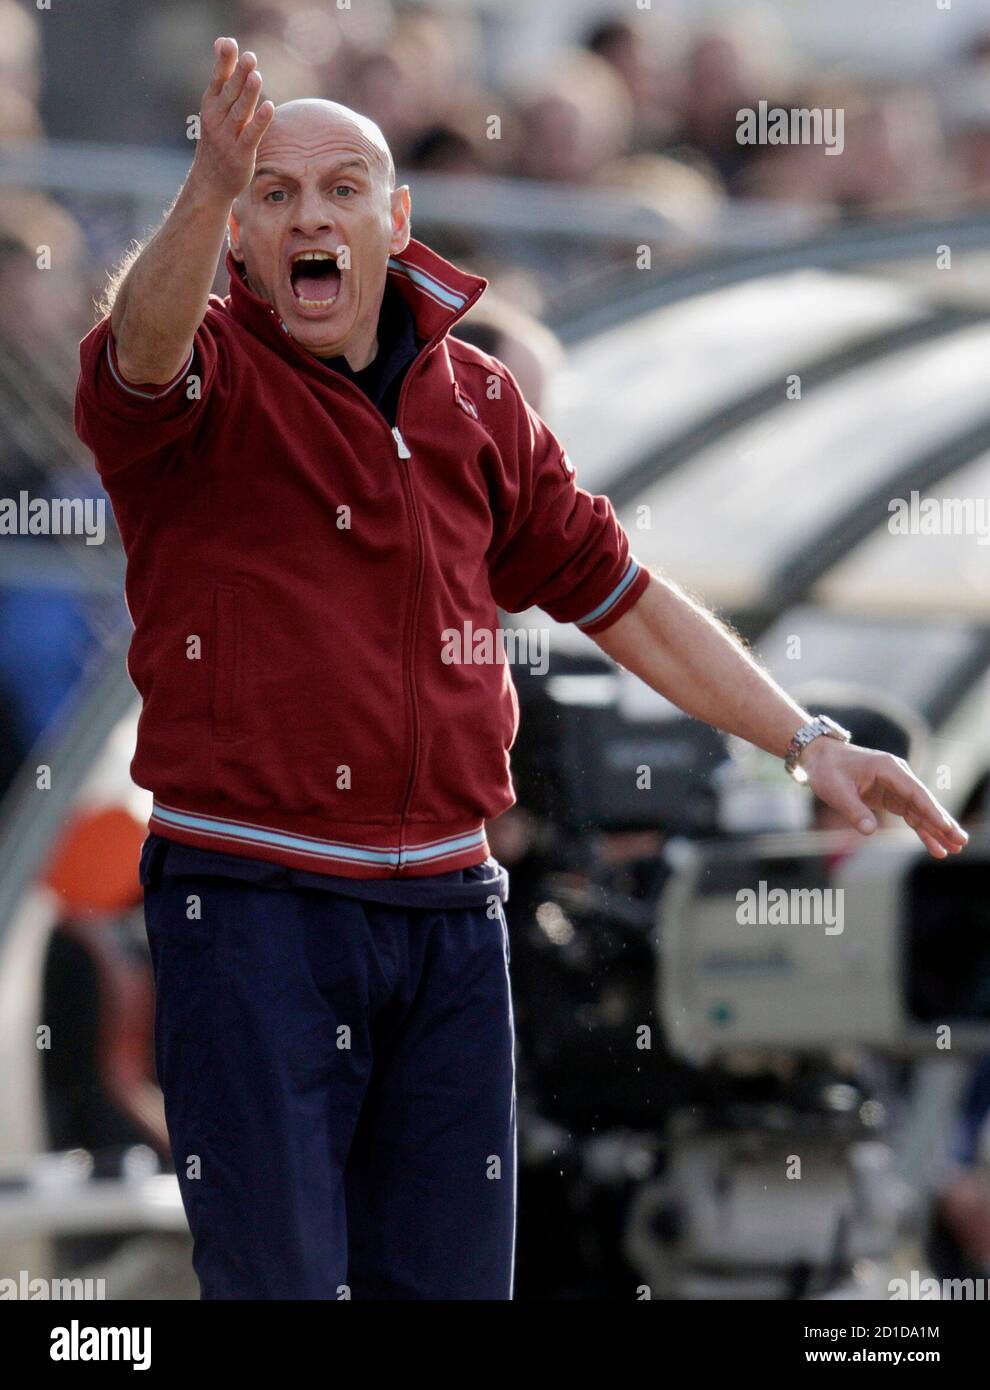 AC Bellinzona's coach Alberto Cavasin reacts during their Swiss Super  League soccer match against FC Luzern in Emmenbruecke, outside Lucerne  February 21, 2010. REUTERS/Romina Amato (SWITZERLAND - Tags: SPORT SOCCER  Stock Photo - Alamy